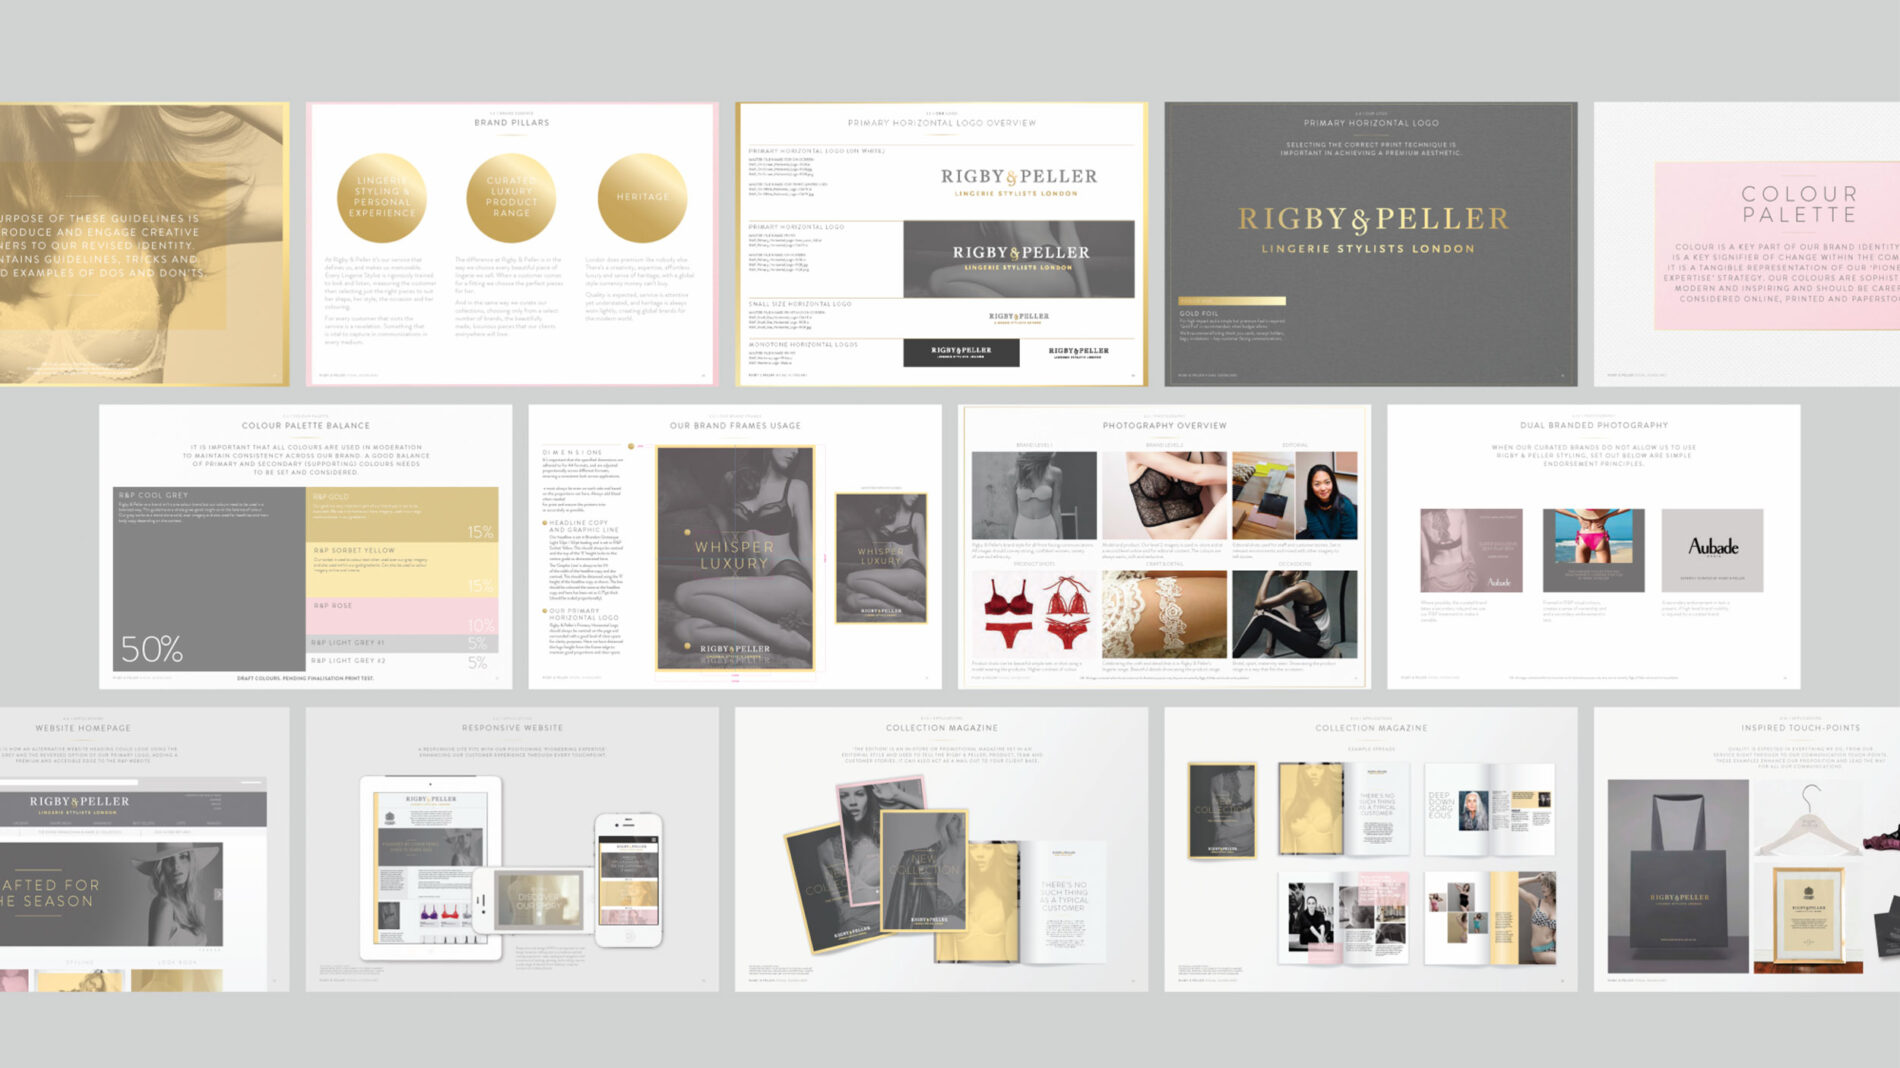 Rigby & Peller brand guideline pages